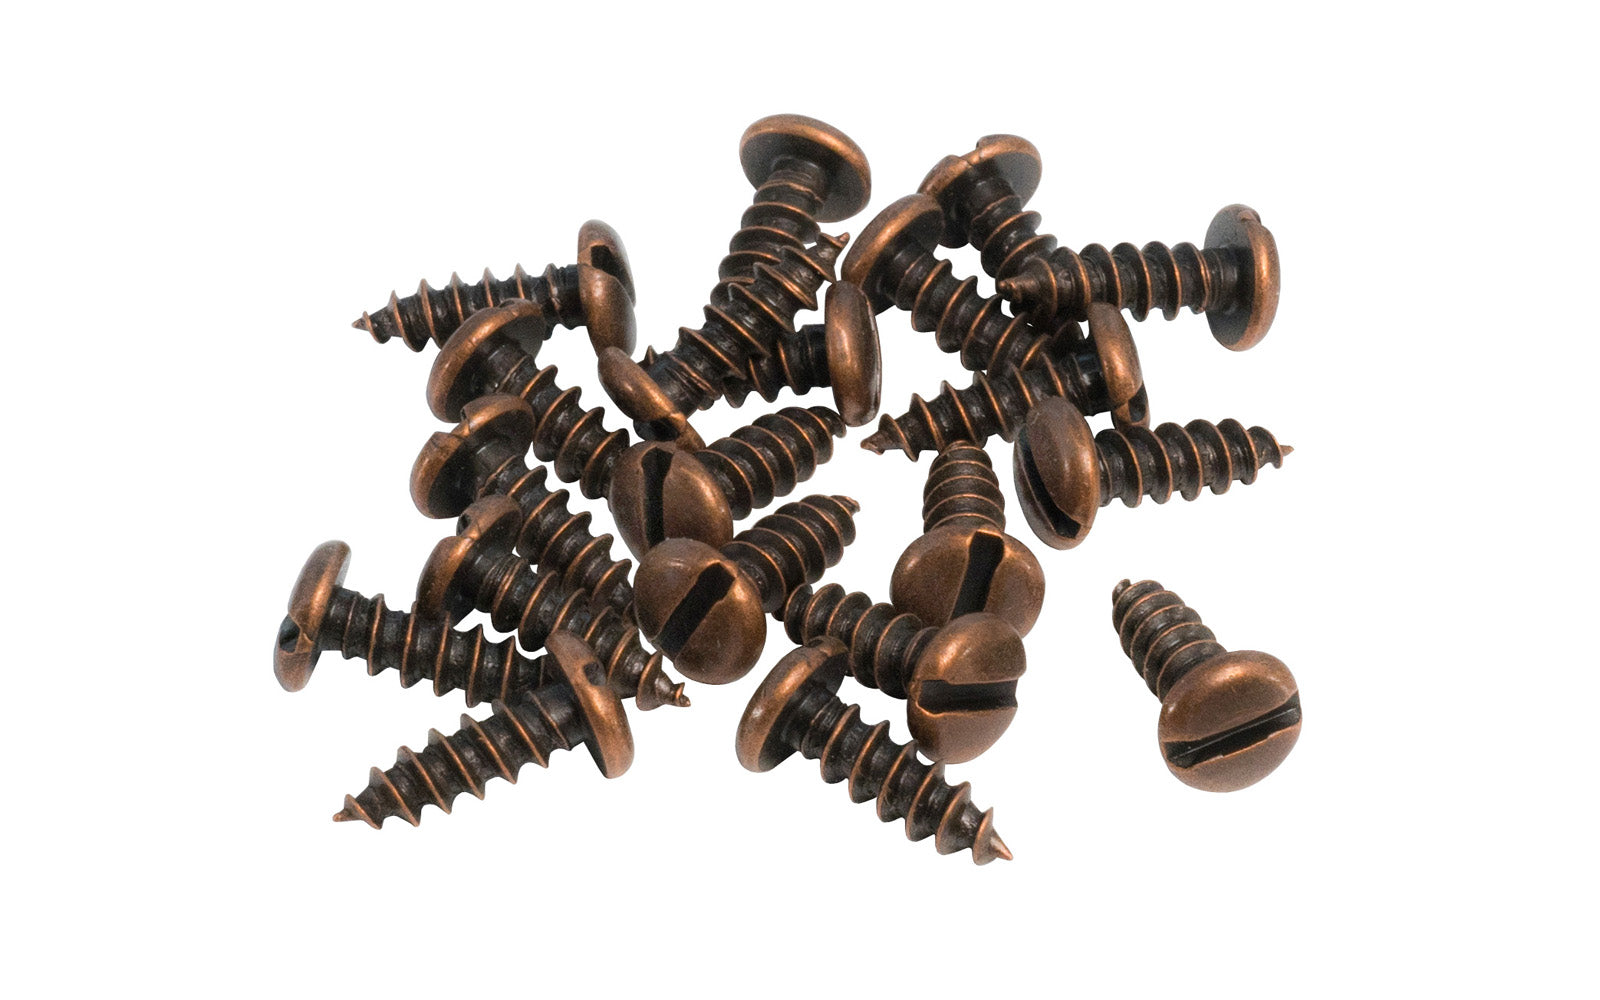 Round head slotted steel screws in a antique copper finish. Great screws for or Mission style or Arts & Crafts style hardware. Traditional & classic vintage-style wood screws. 20 PCS in bag. 1/2